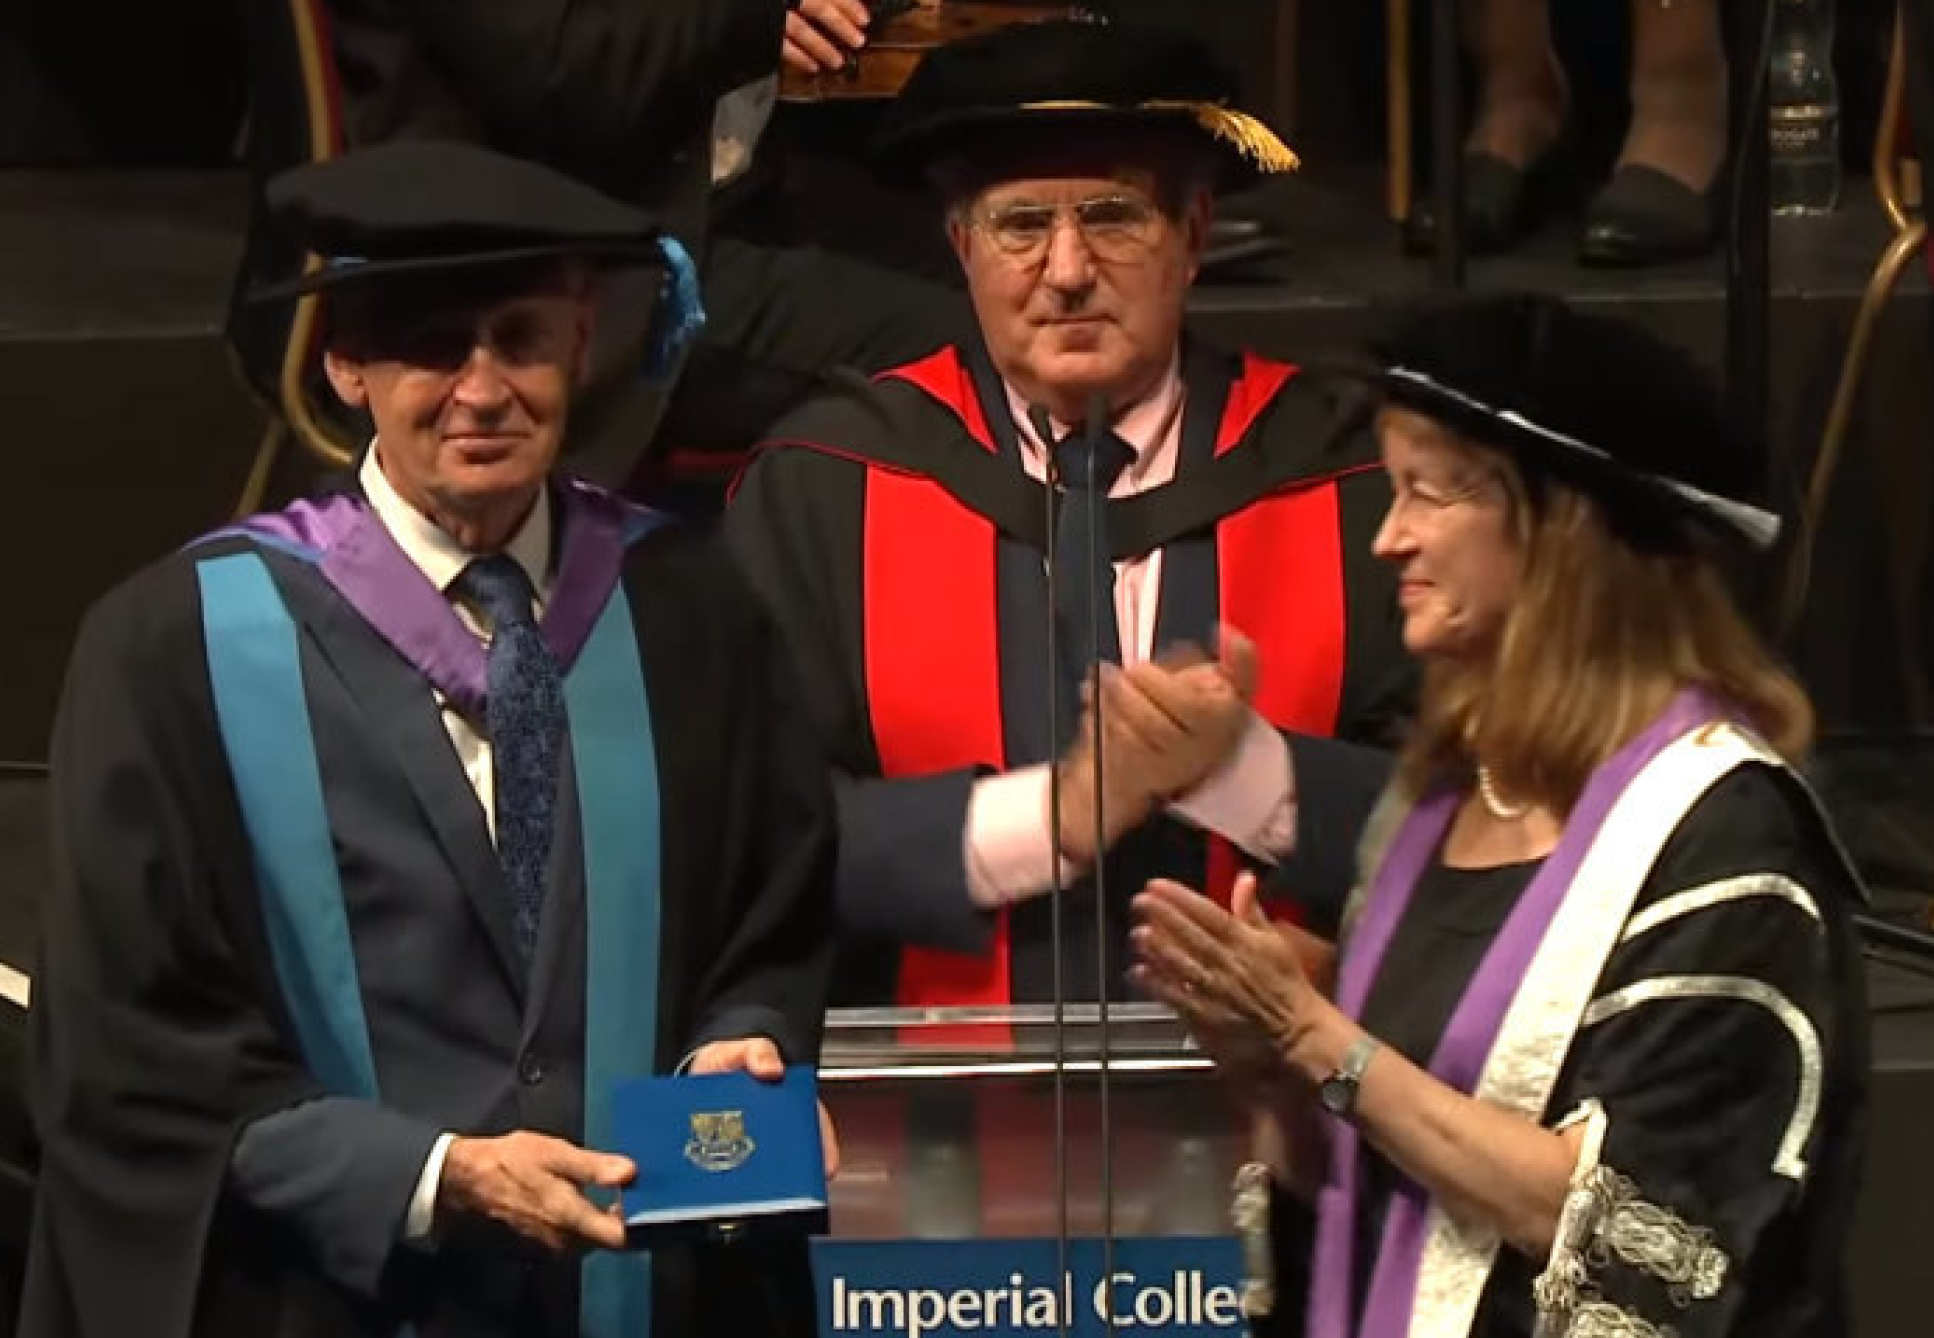 Professor James Best presented with an Imperial College Medal by President Alice Gast